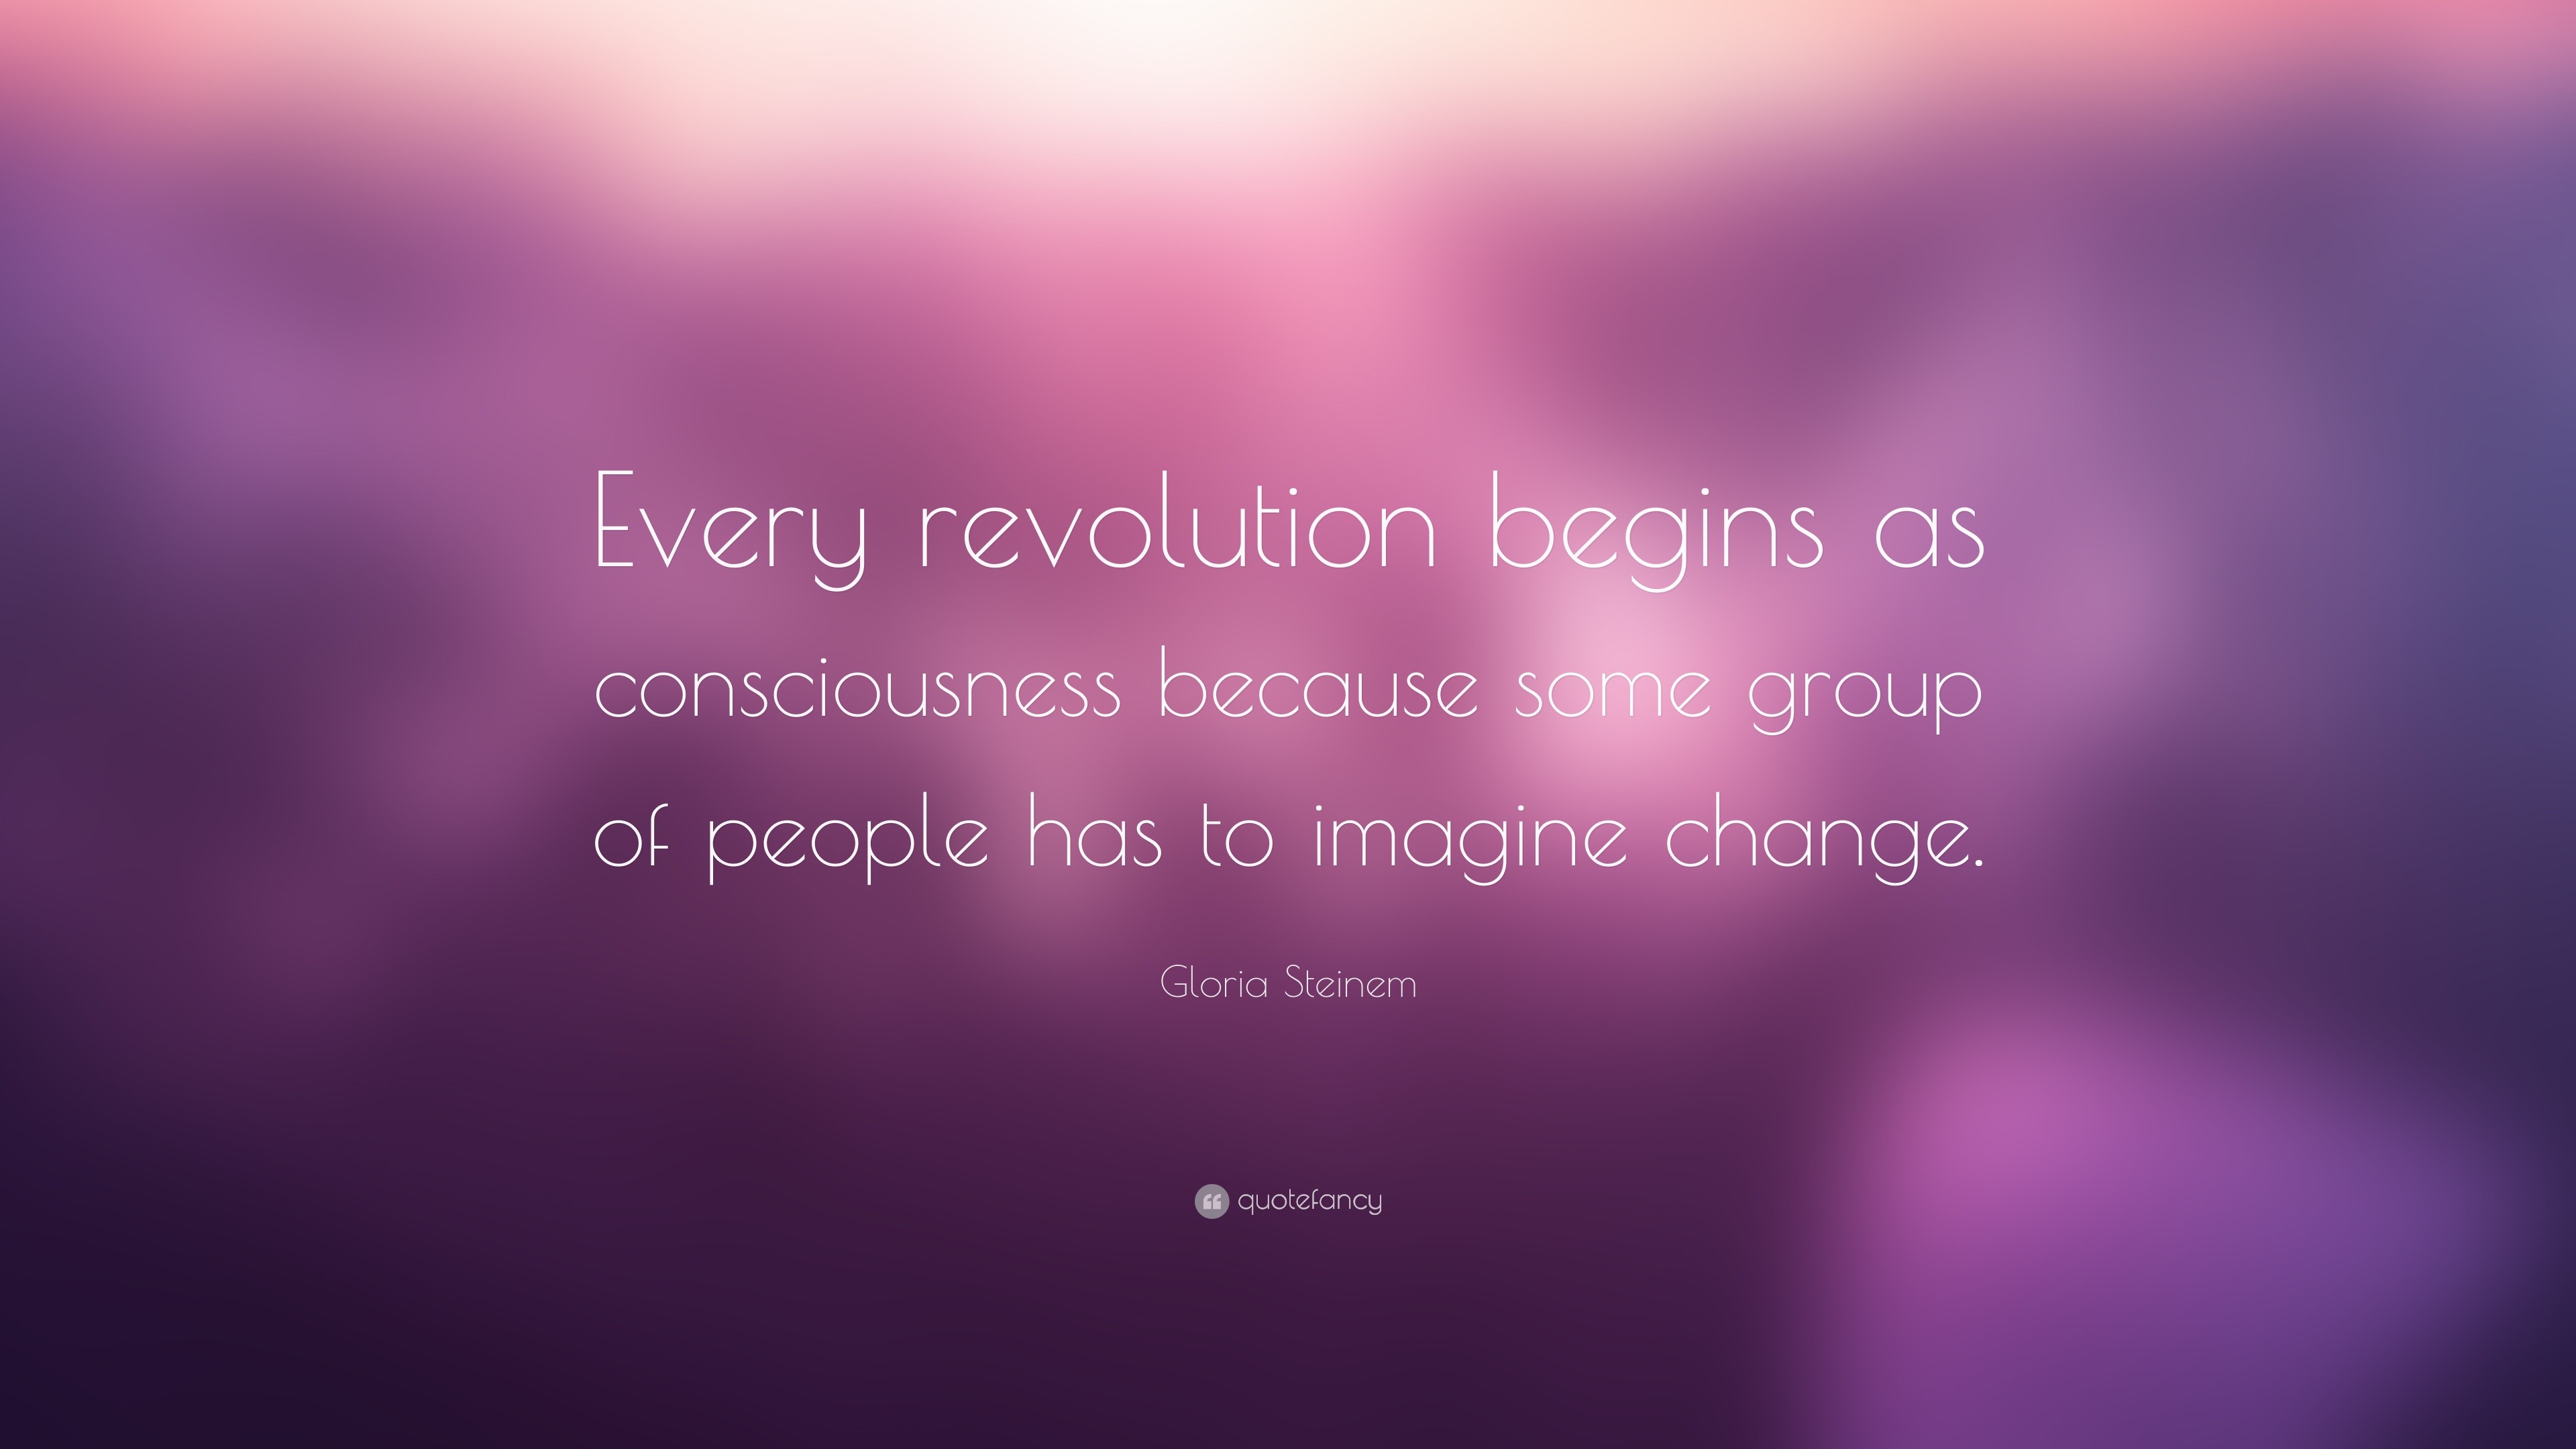 Gloria Steinem Quote: “Every revolution begins as consciousness because  some group of people has to imagine